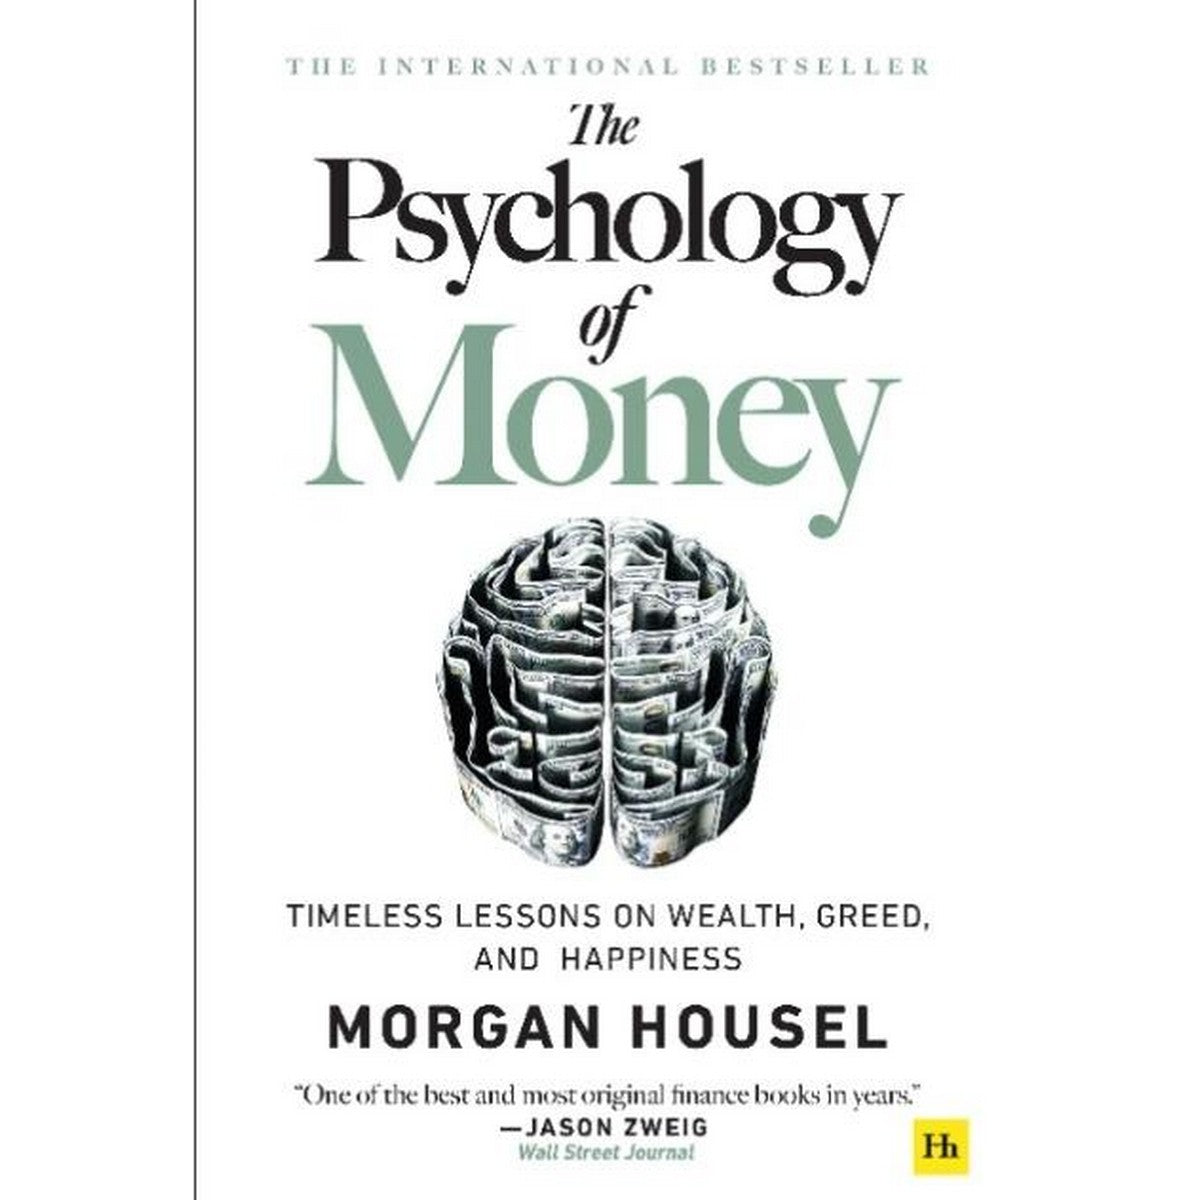 The Psychology Of Money By Morgan Housel (book)